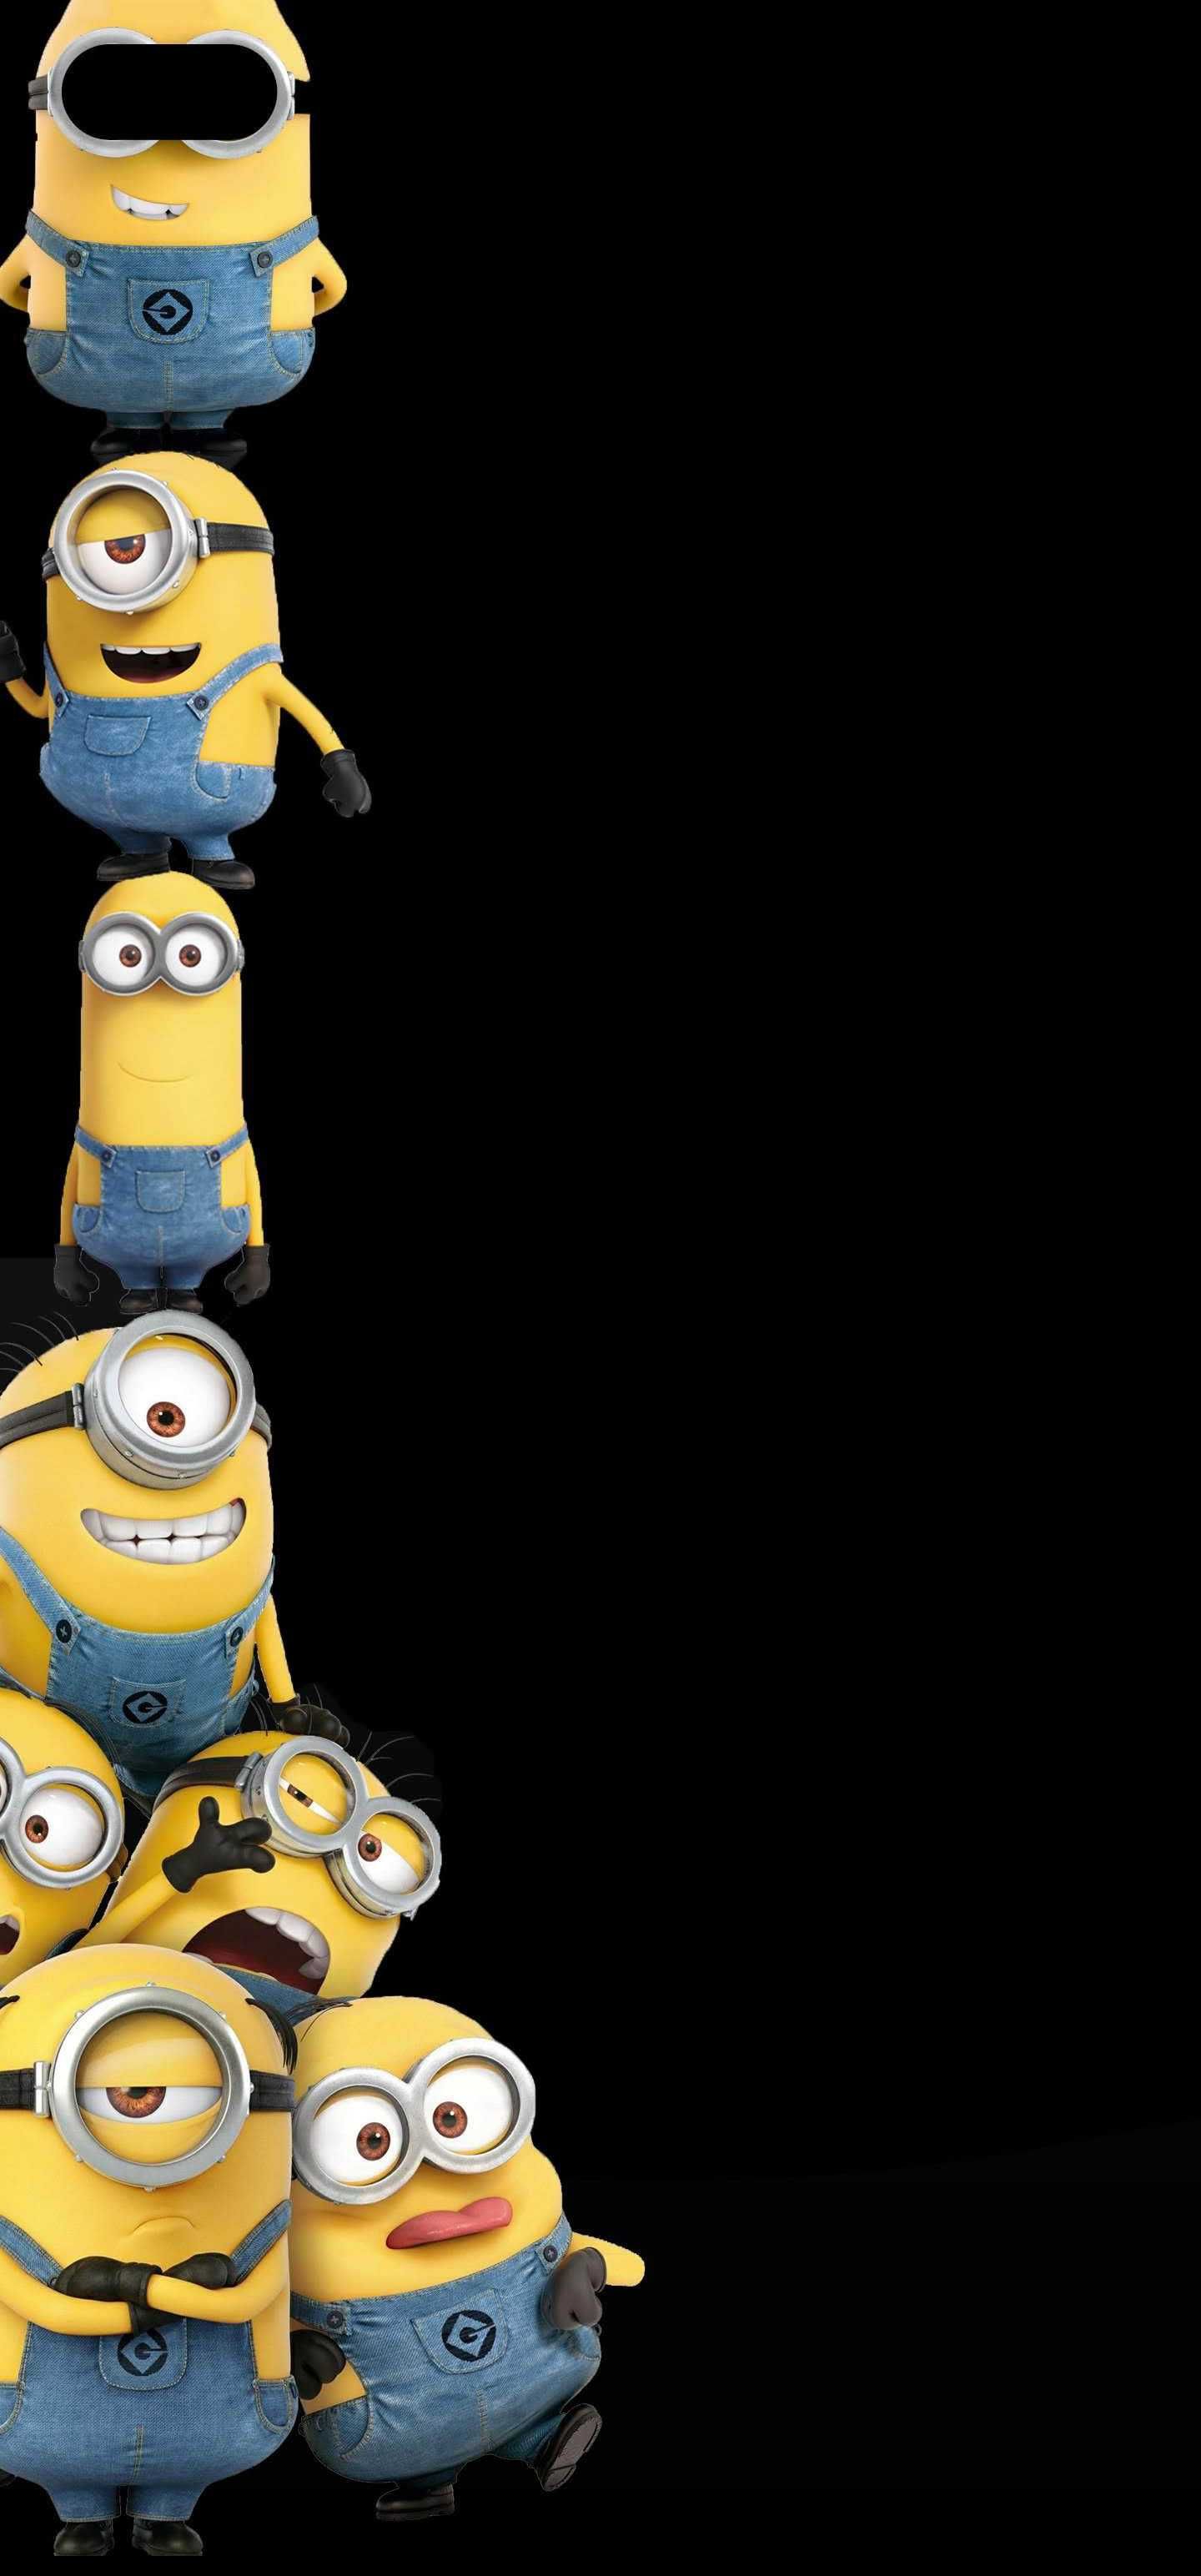 Download Free Minions Wallpaper. Discover more Despicable Me, Film, Minion, Minions wallpaper. Minions wallpaper, Cute minions wallpaper, Minion wallpaper iphone